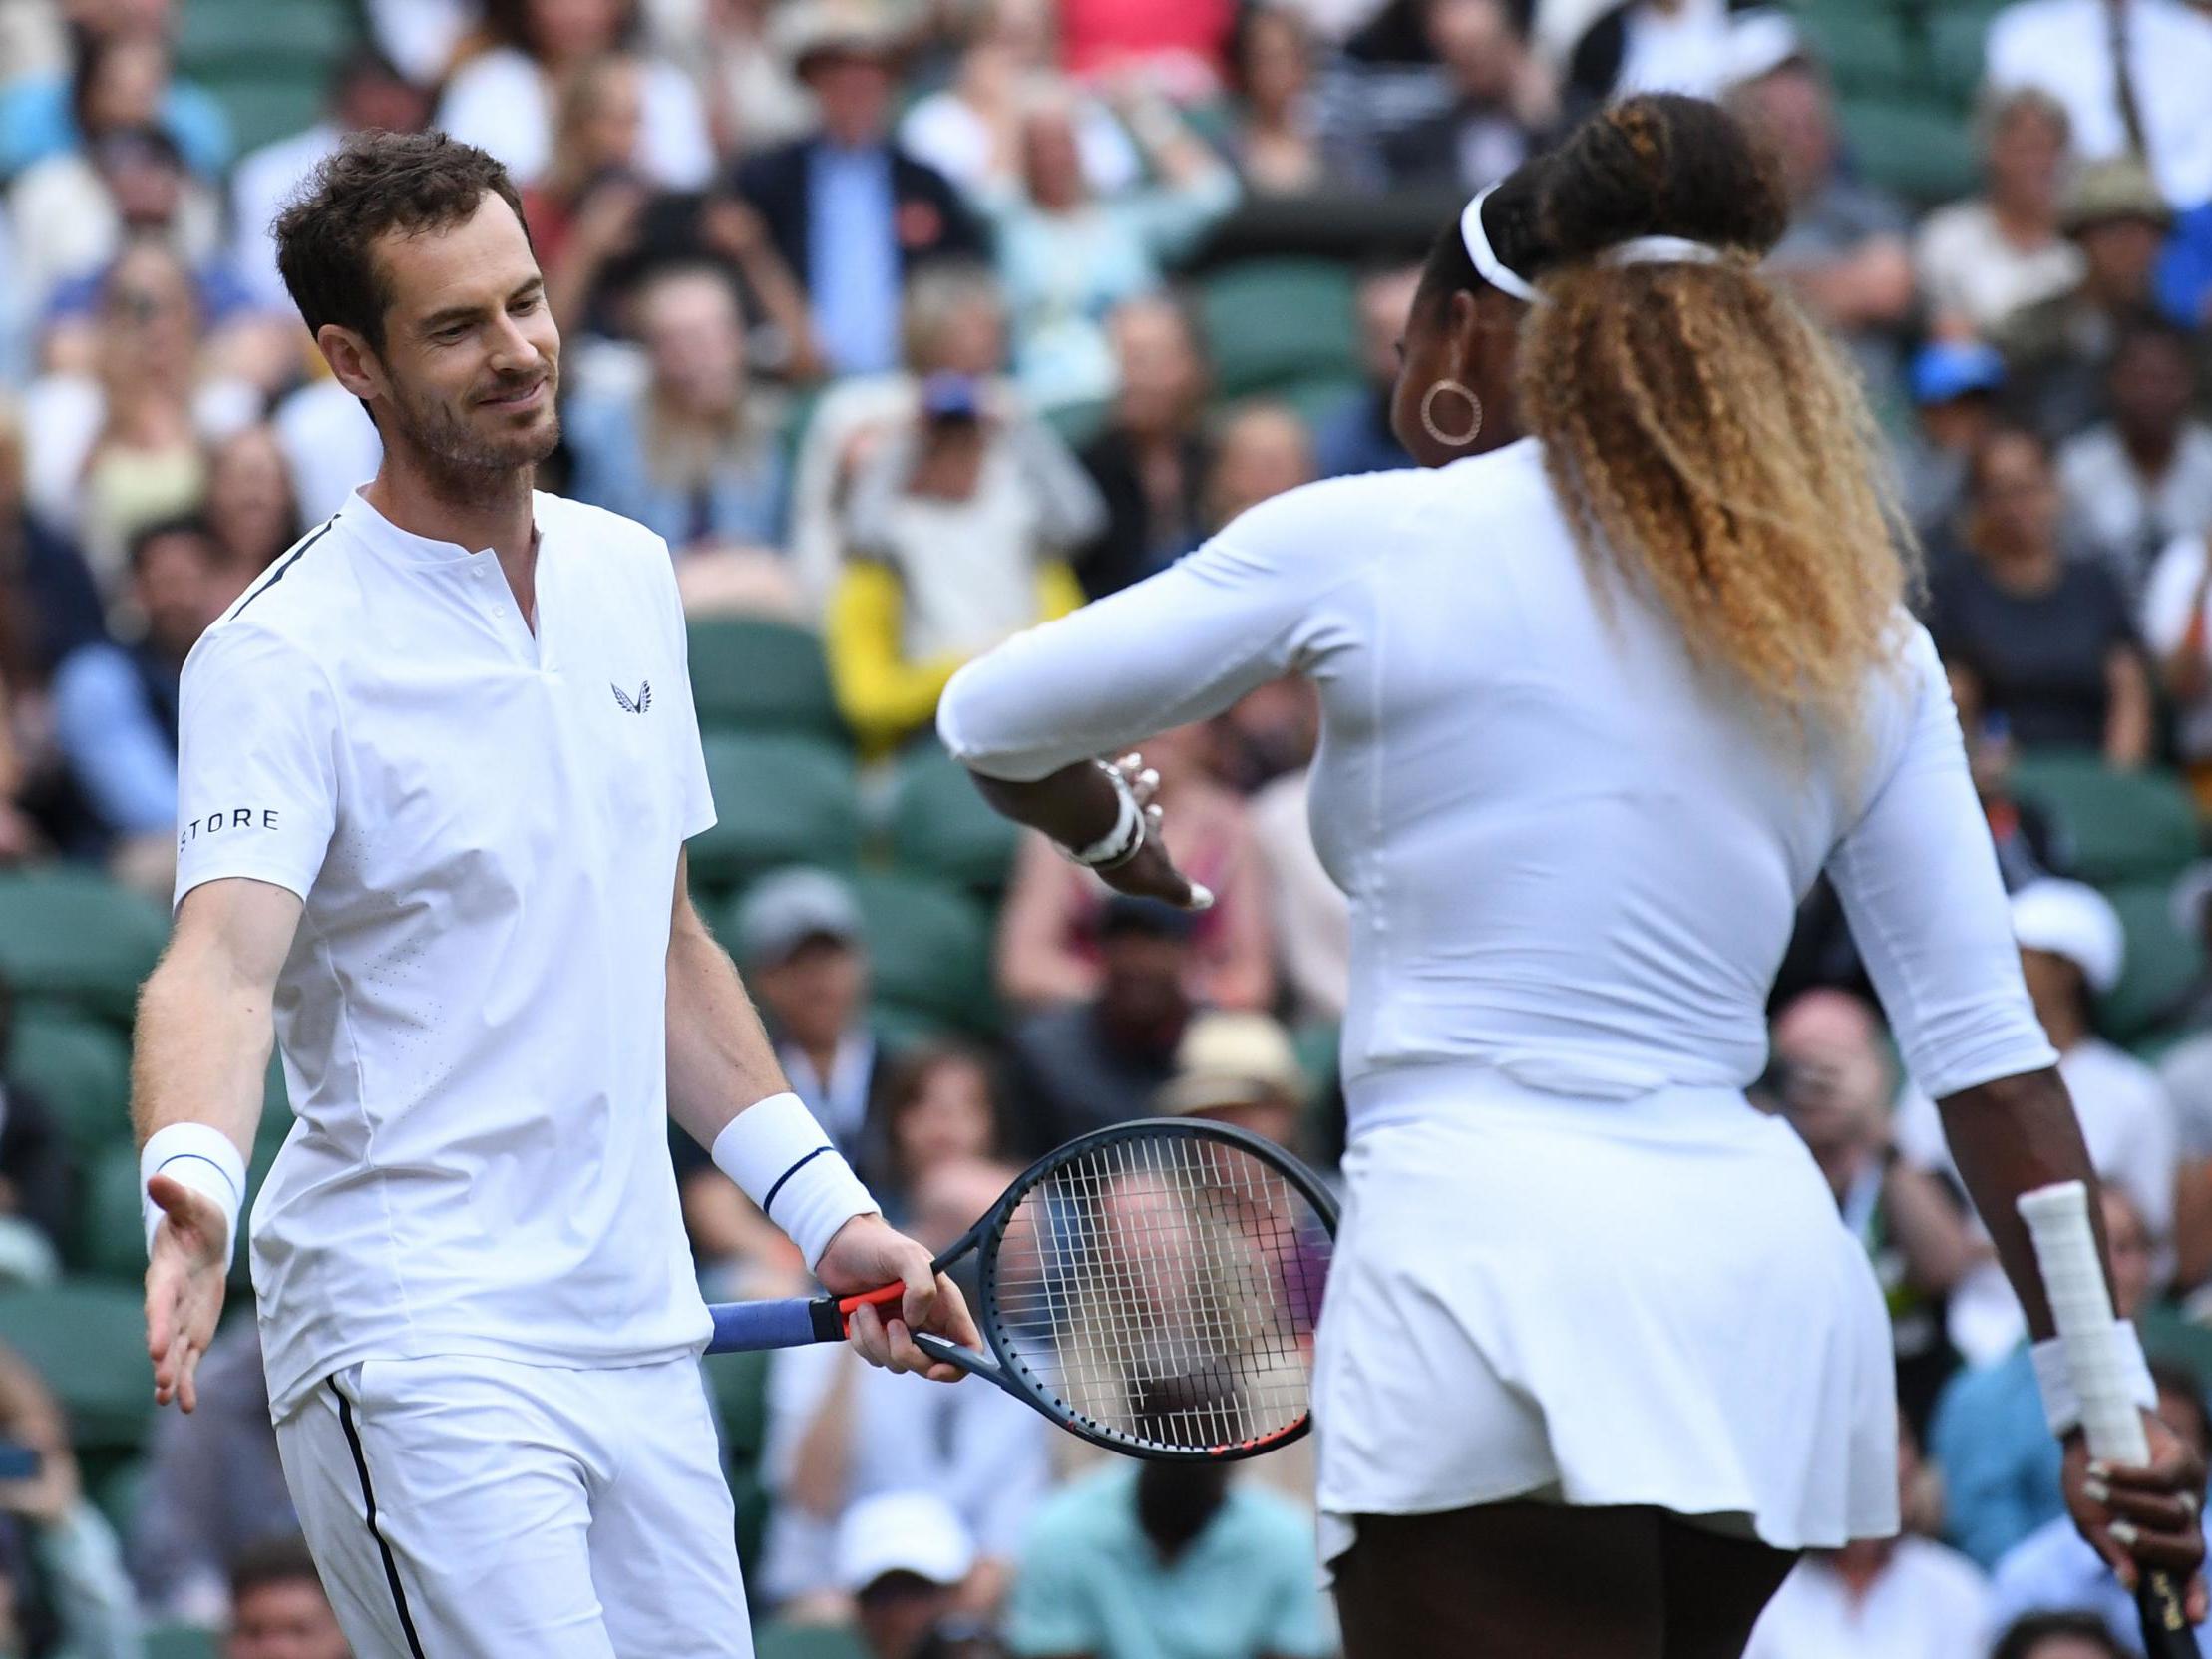 Wimbledon 2019: Andy Murray and Serena Williams sharing leadership role on court after first victory